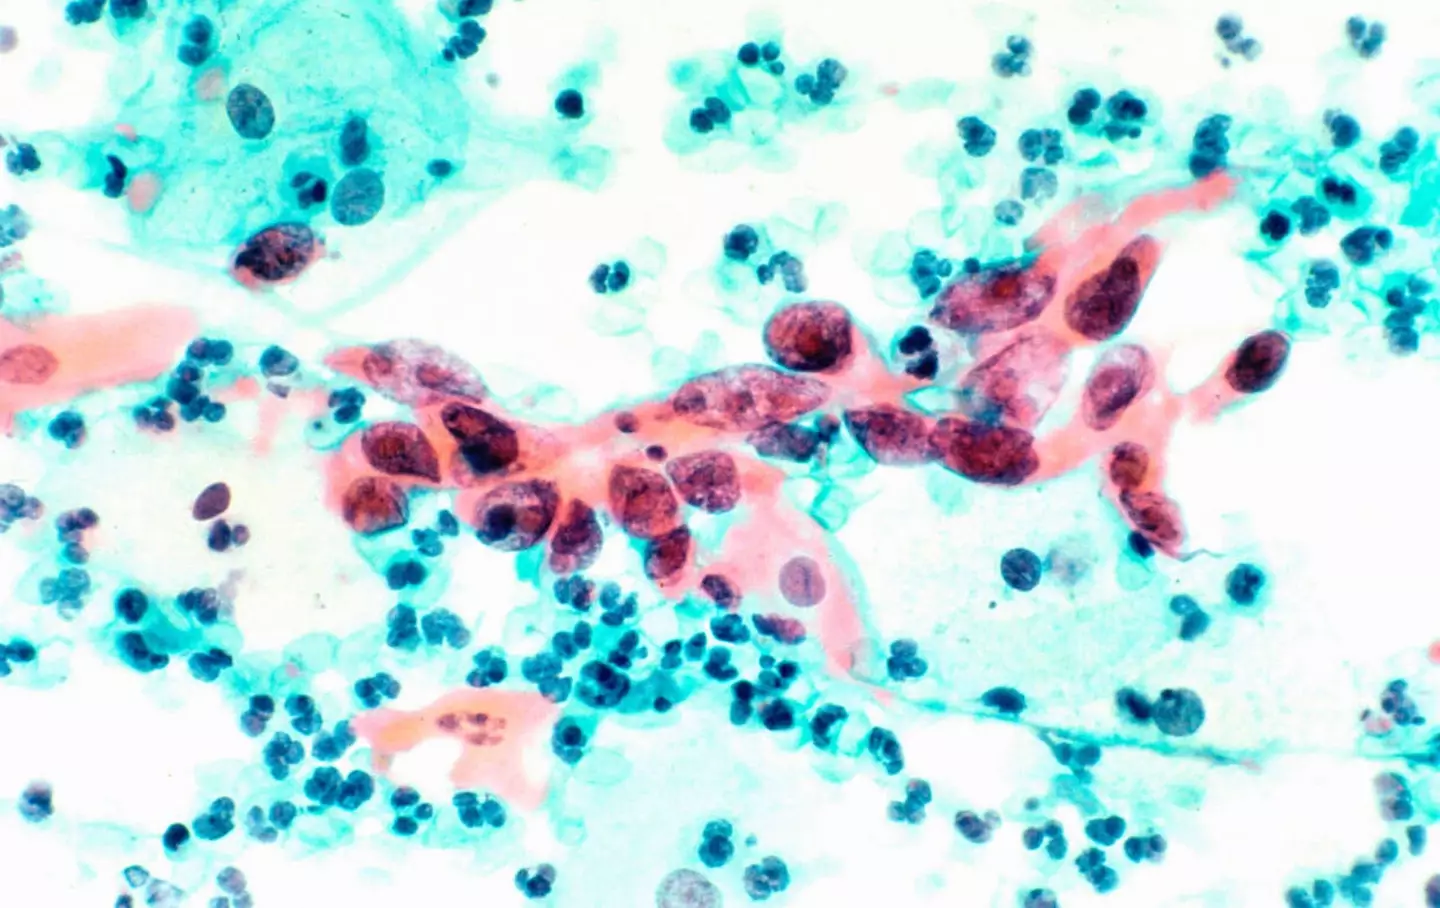 The test could help detect cervical cancer.